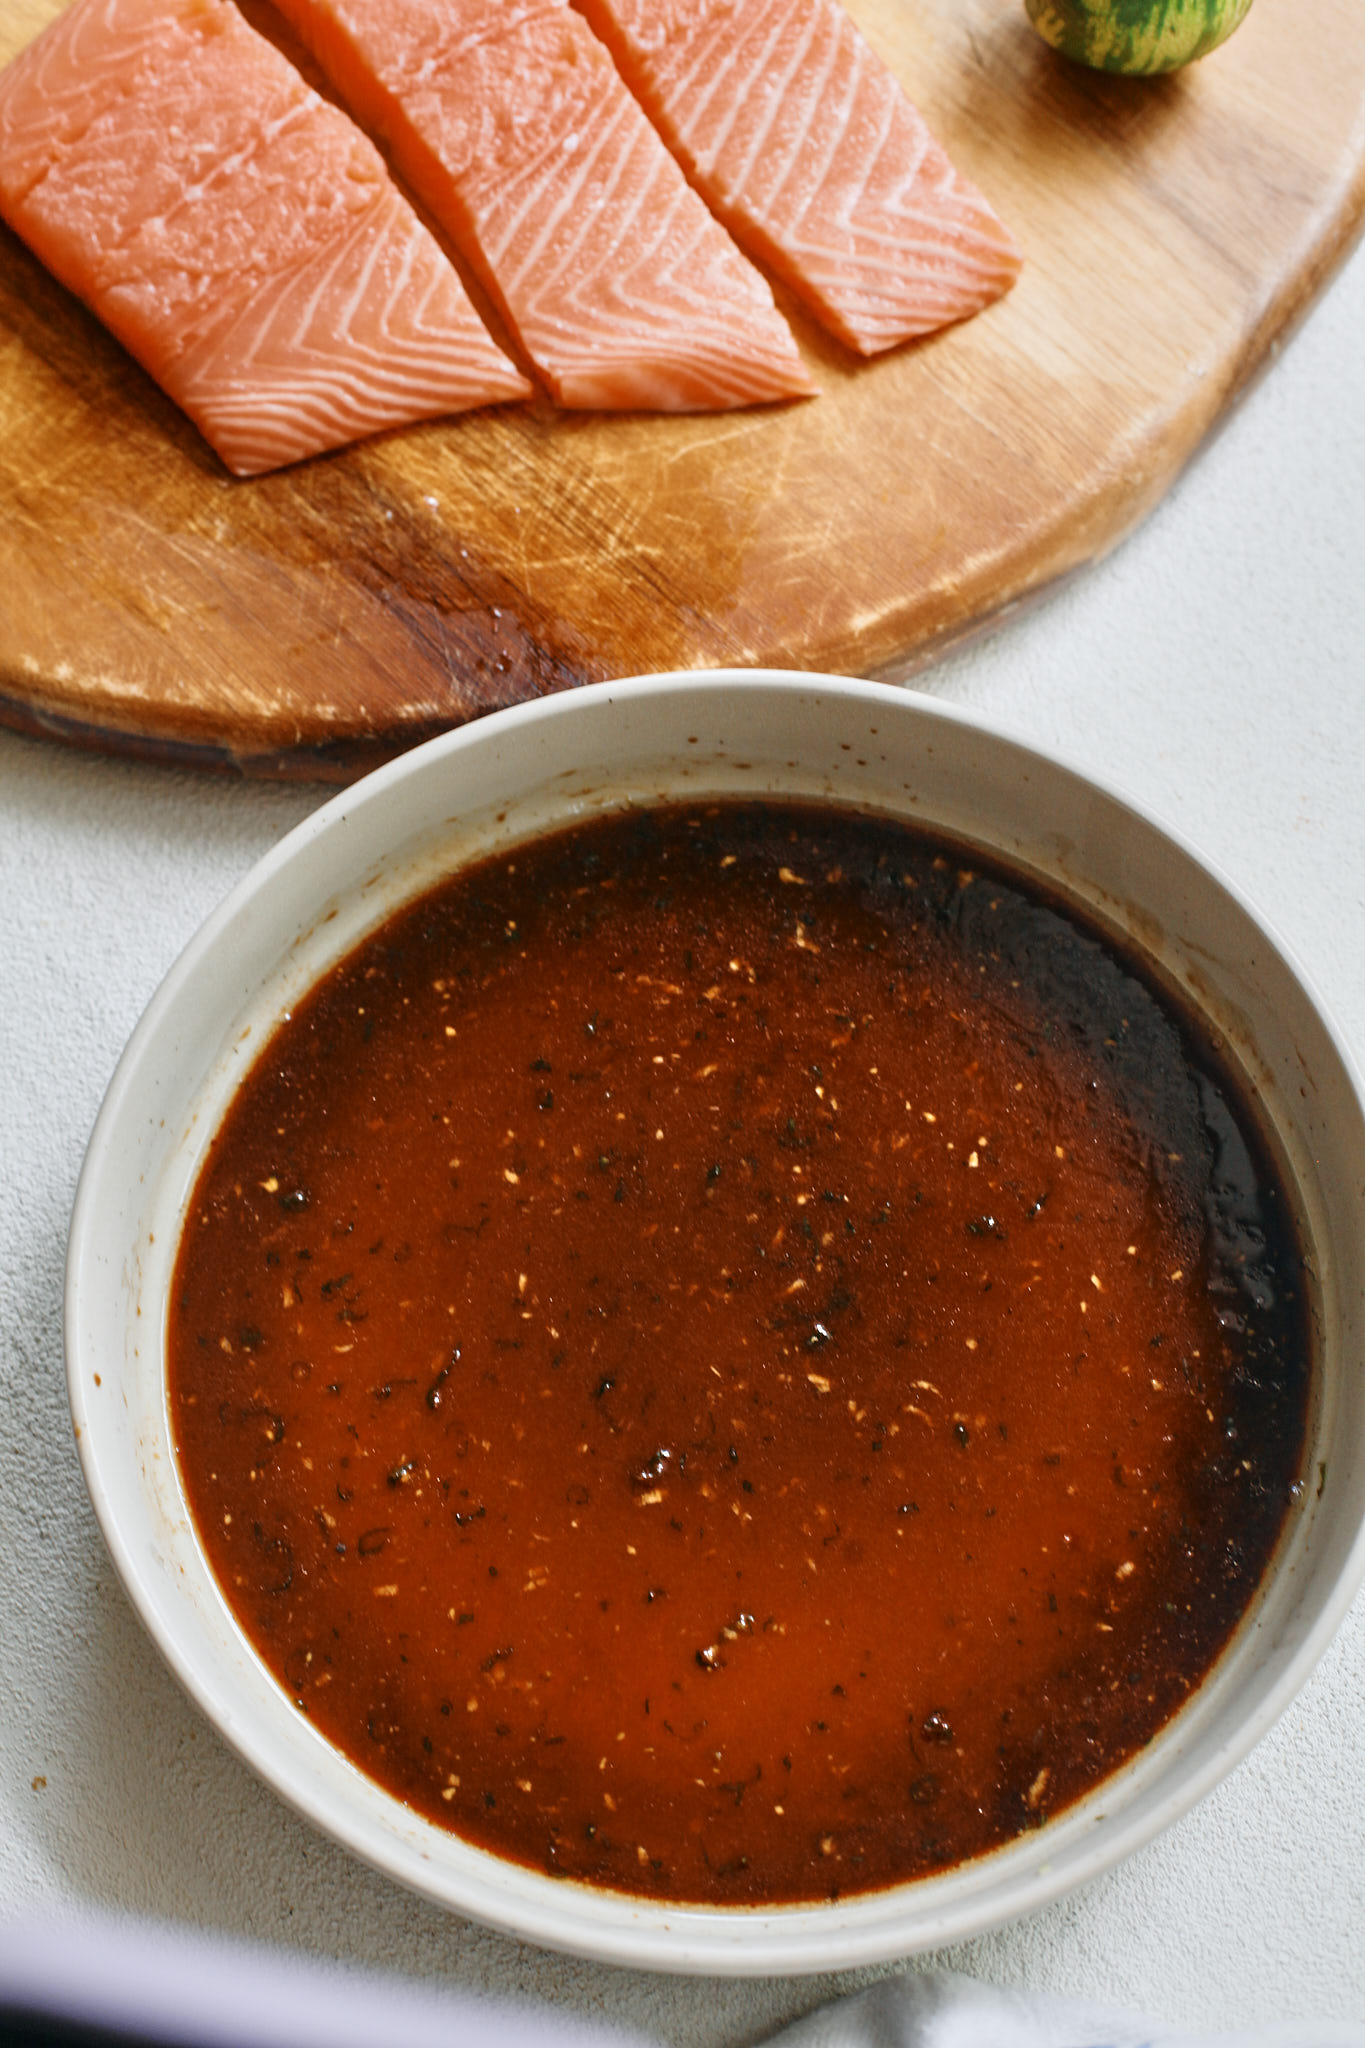 marinade for the salmon